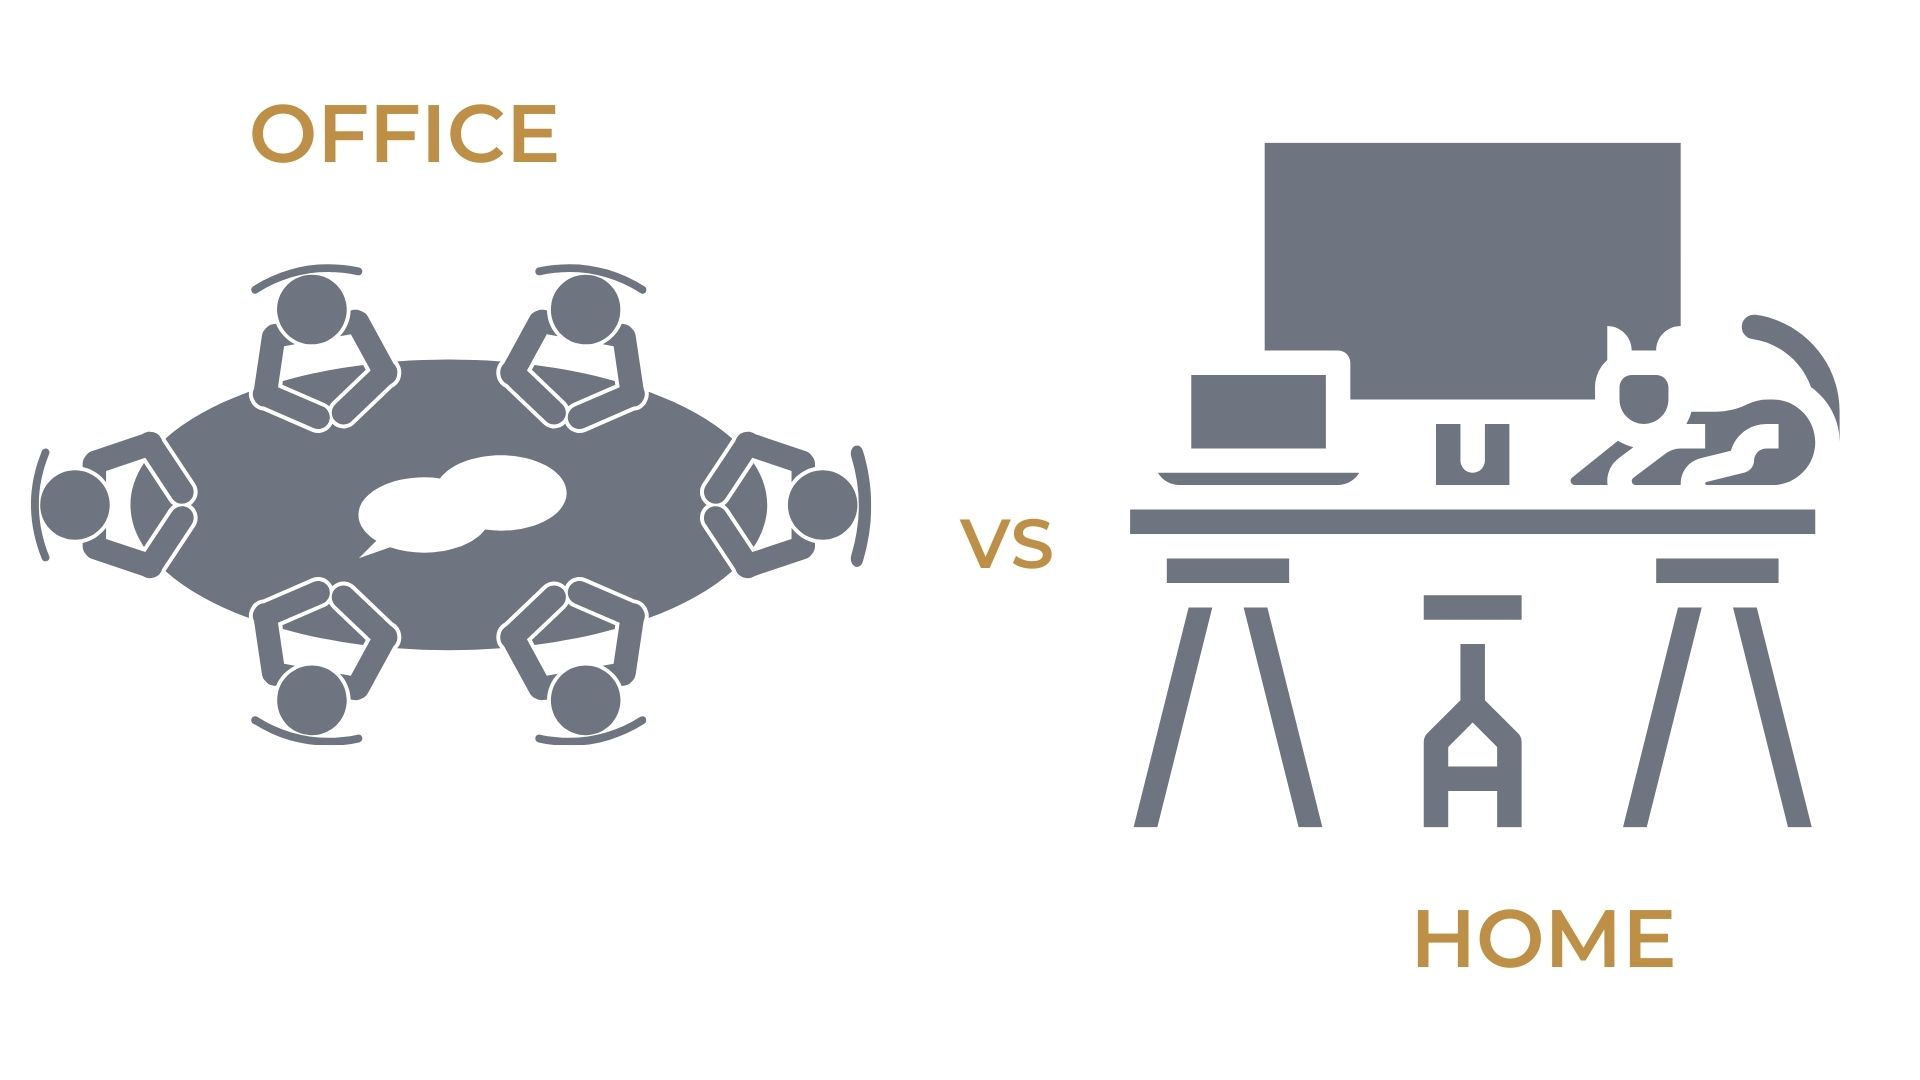 The Definition of “Productive” is  Different In-Office vs. At-Home